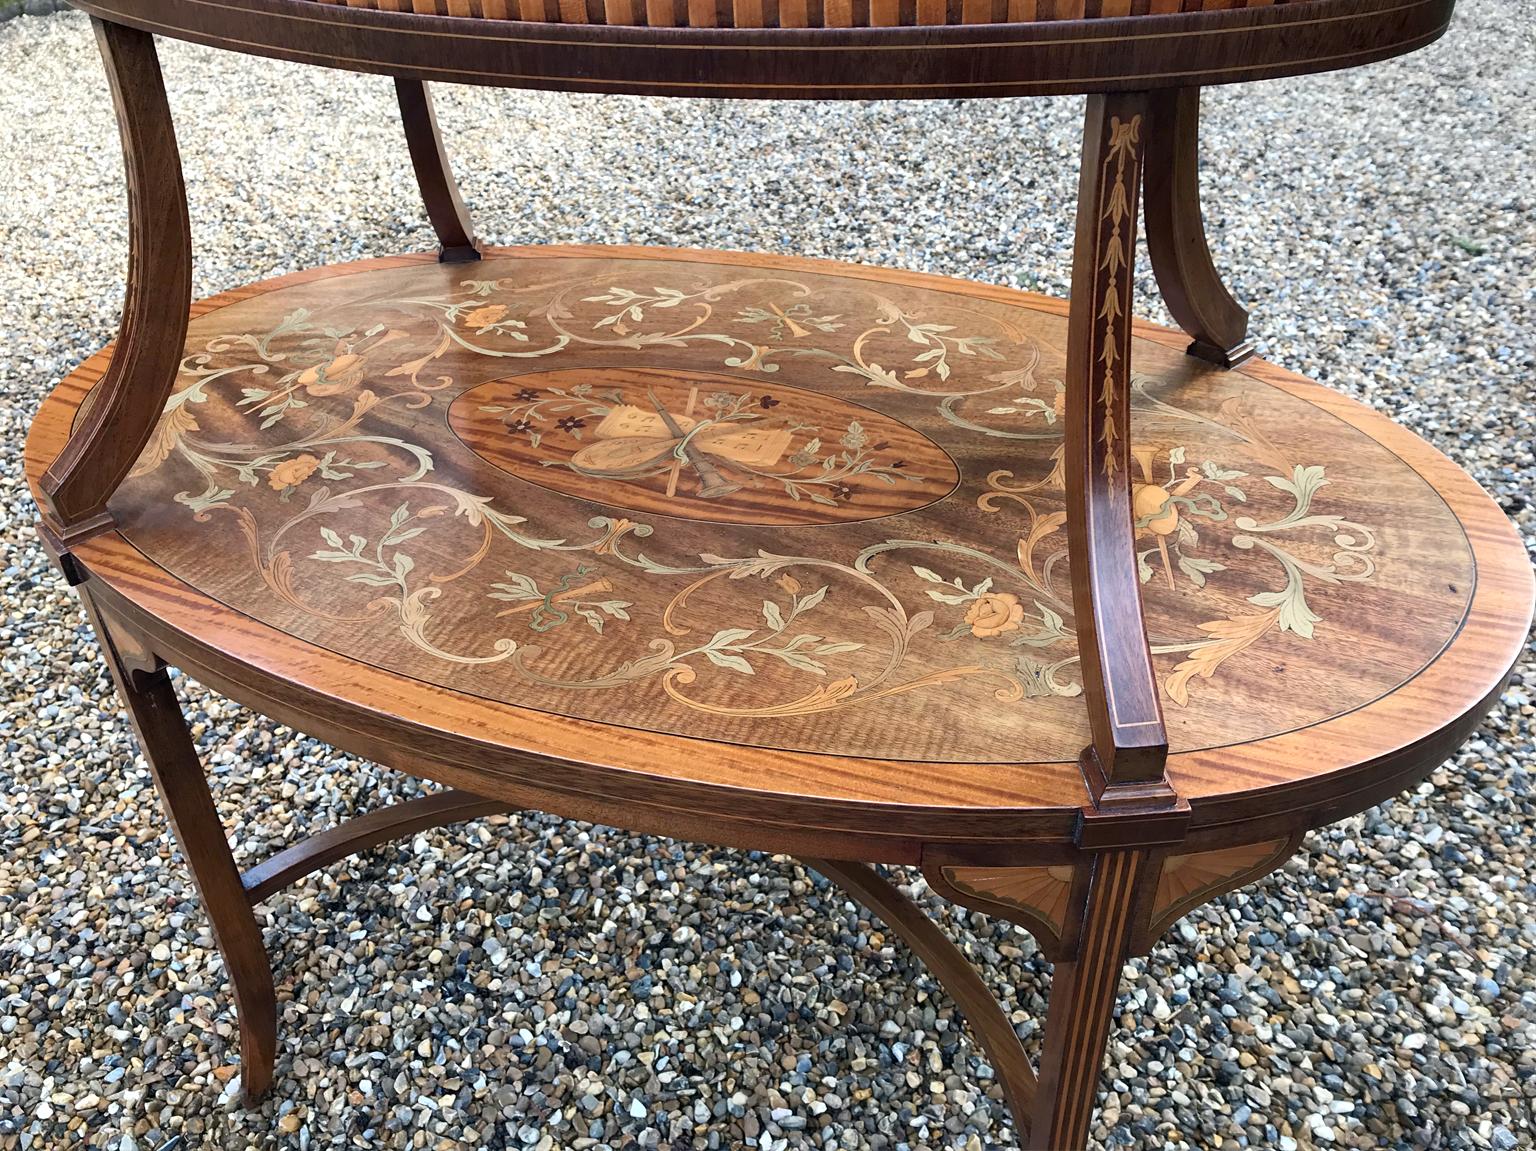 19th Century Mahogany Marquetry Tier Tray Table by S & H Jewell, London In Excellent Condition For Sale In Richmond, London, Surrey